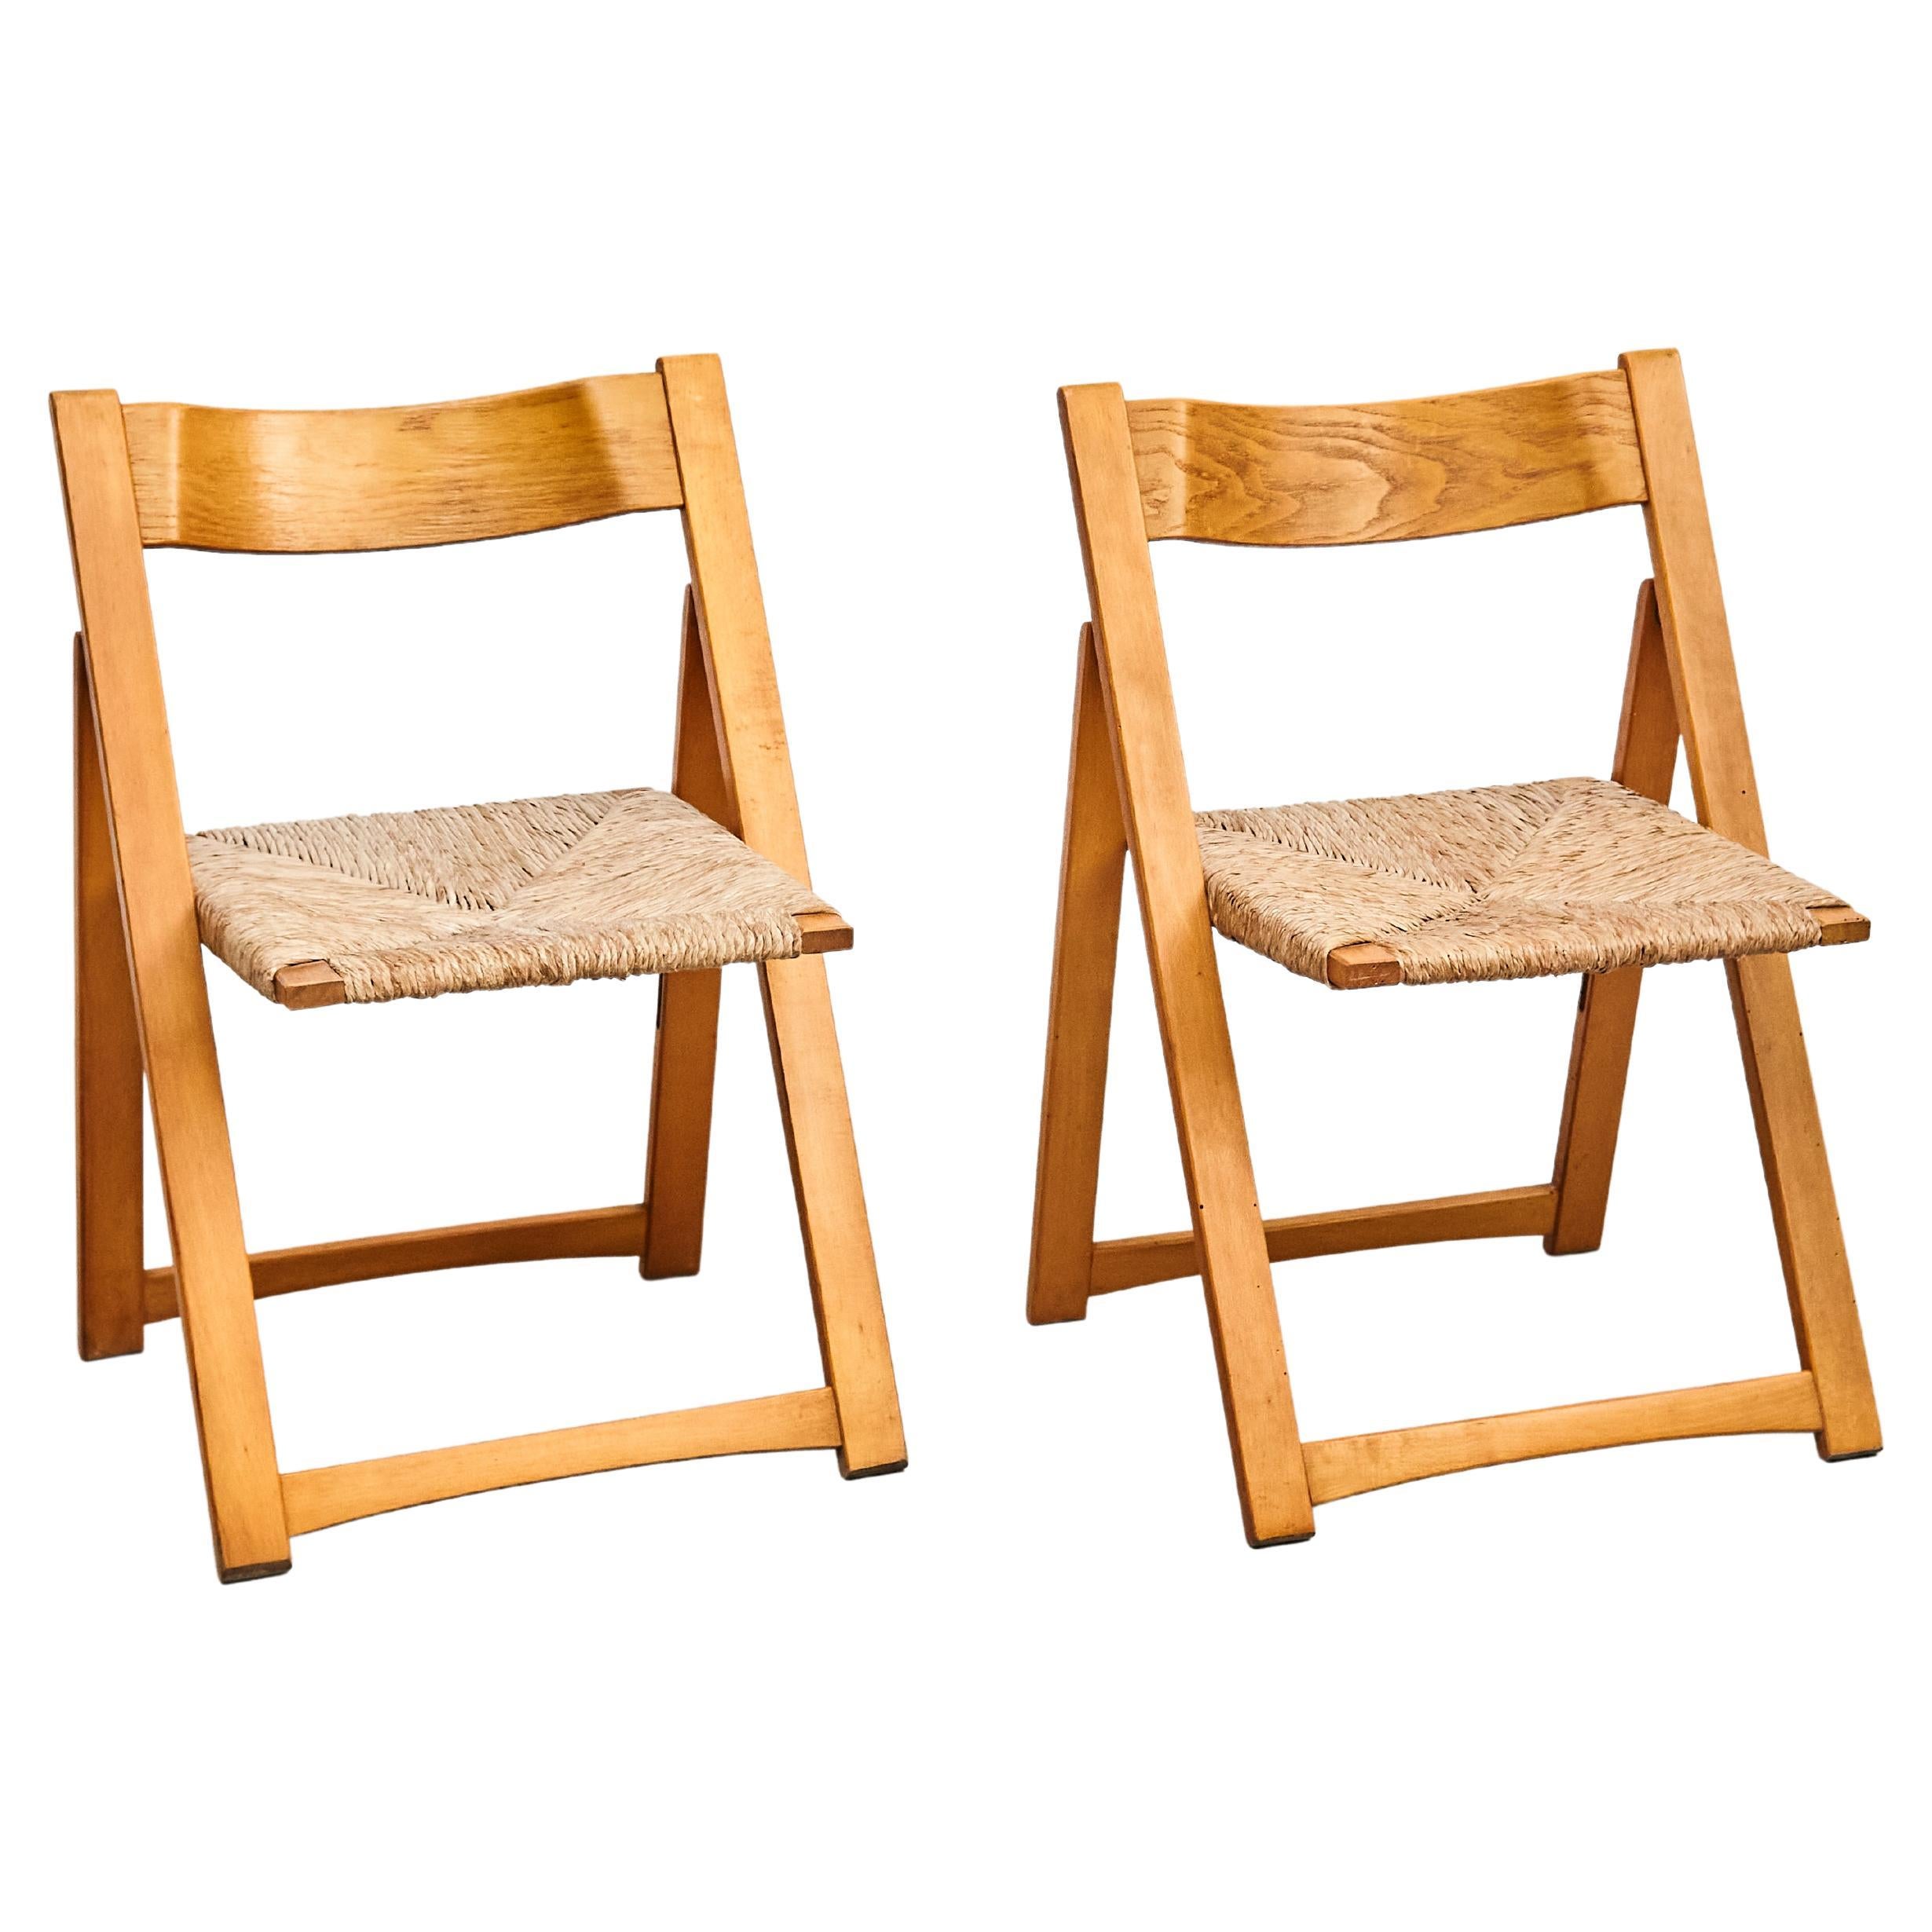 Pair of Rationalist Rattan and Wood Folding Chairs, circa 1960 For Sale